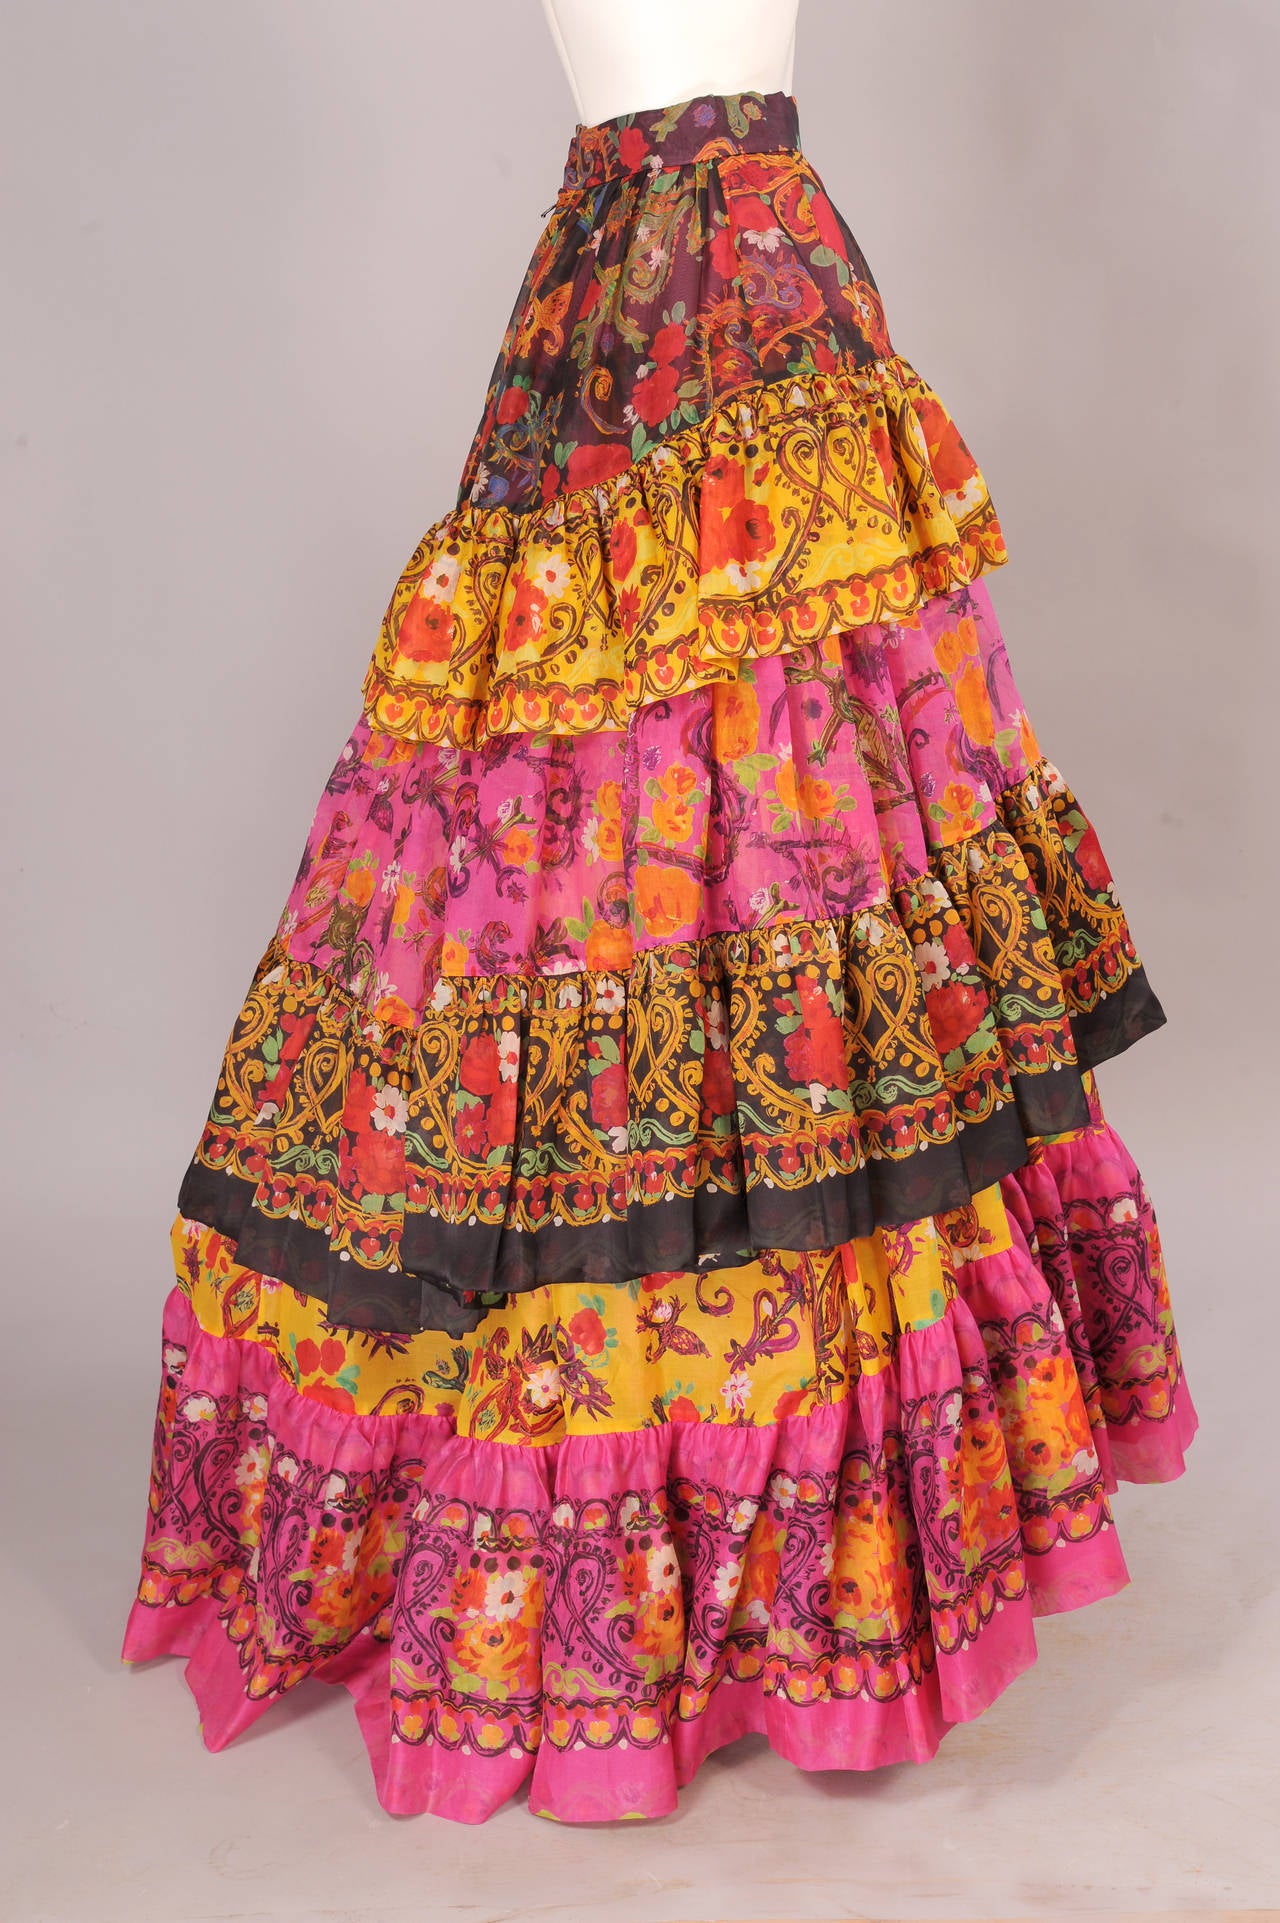 Christian Lacroix has combined five colorful printed fabrics into this beautiful tiered evening skirt. Just add a simple T shirt or cashmere sweater. The skirt has a natural waistline and it is slim over the hips, and then it becomes a fiesta! There